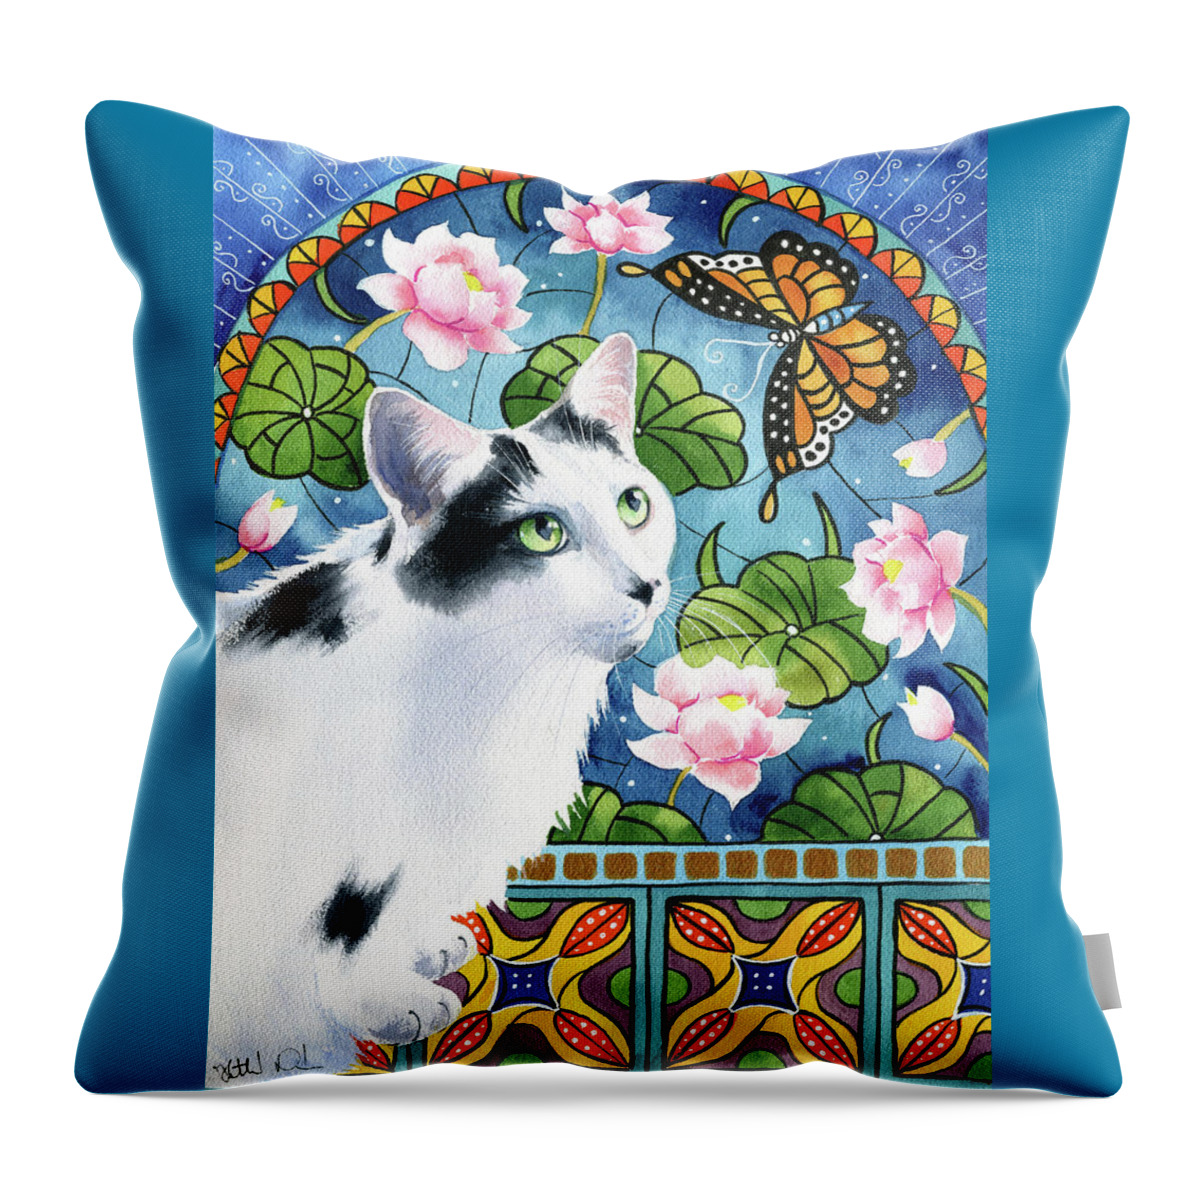 Tuxedo Cats Throw Pillow featuring the painting Maximillion With Waterlilies Tuxedo Cat Painting by Dora Hathazi Mendes